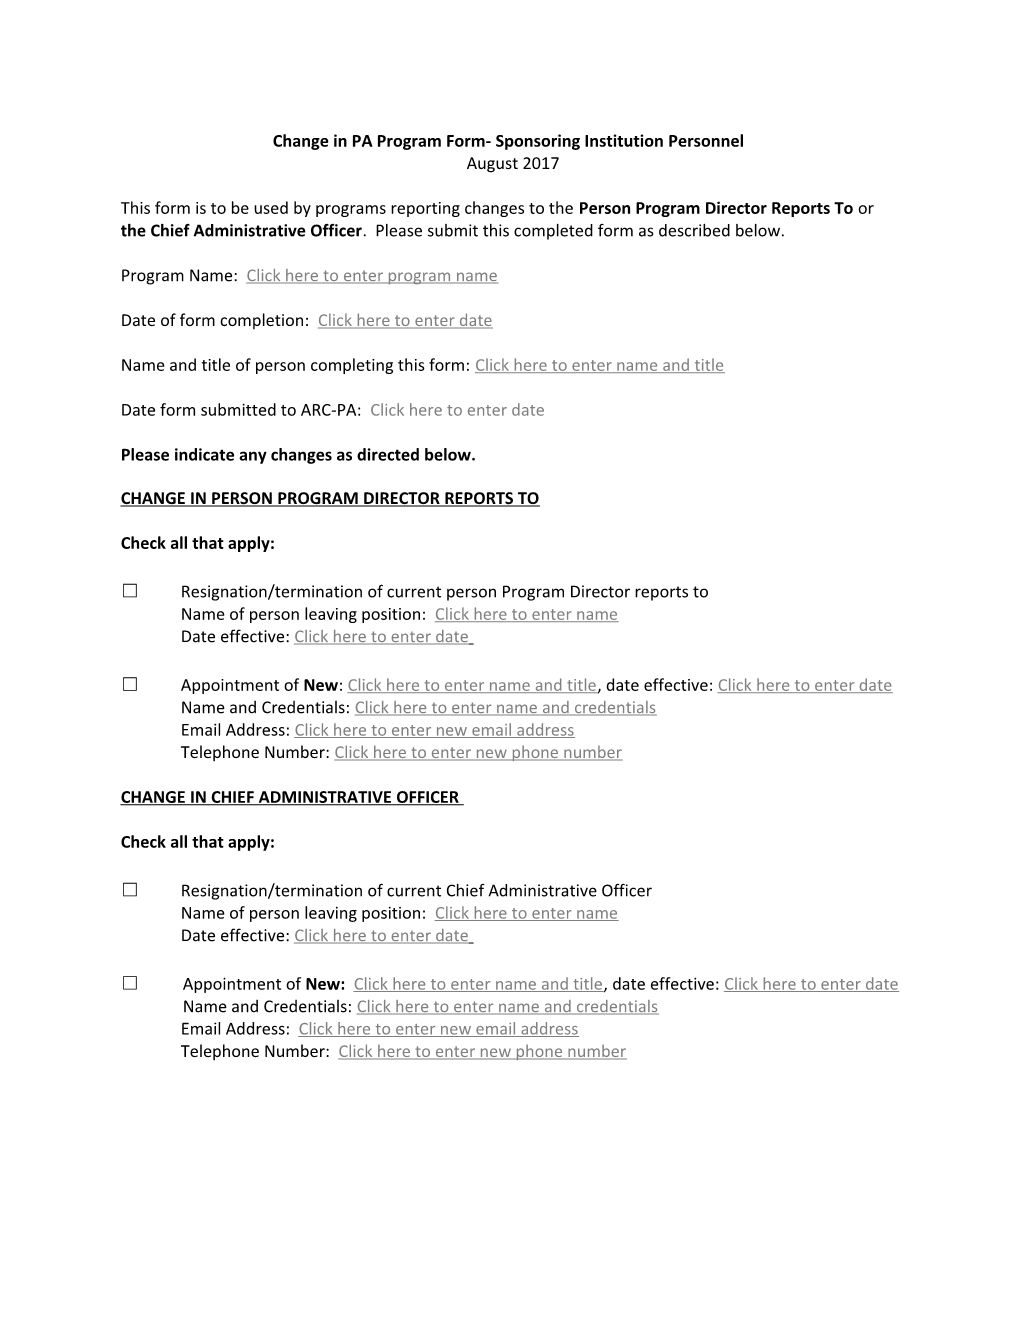 Change in PA Program Form-Program and Sponsoring Institution Personnel Page 2